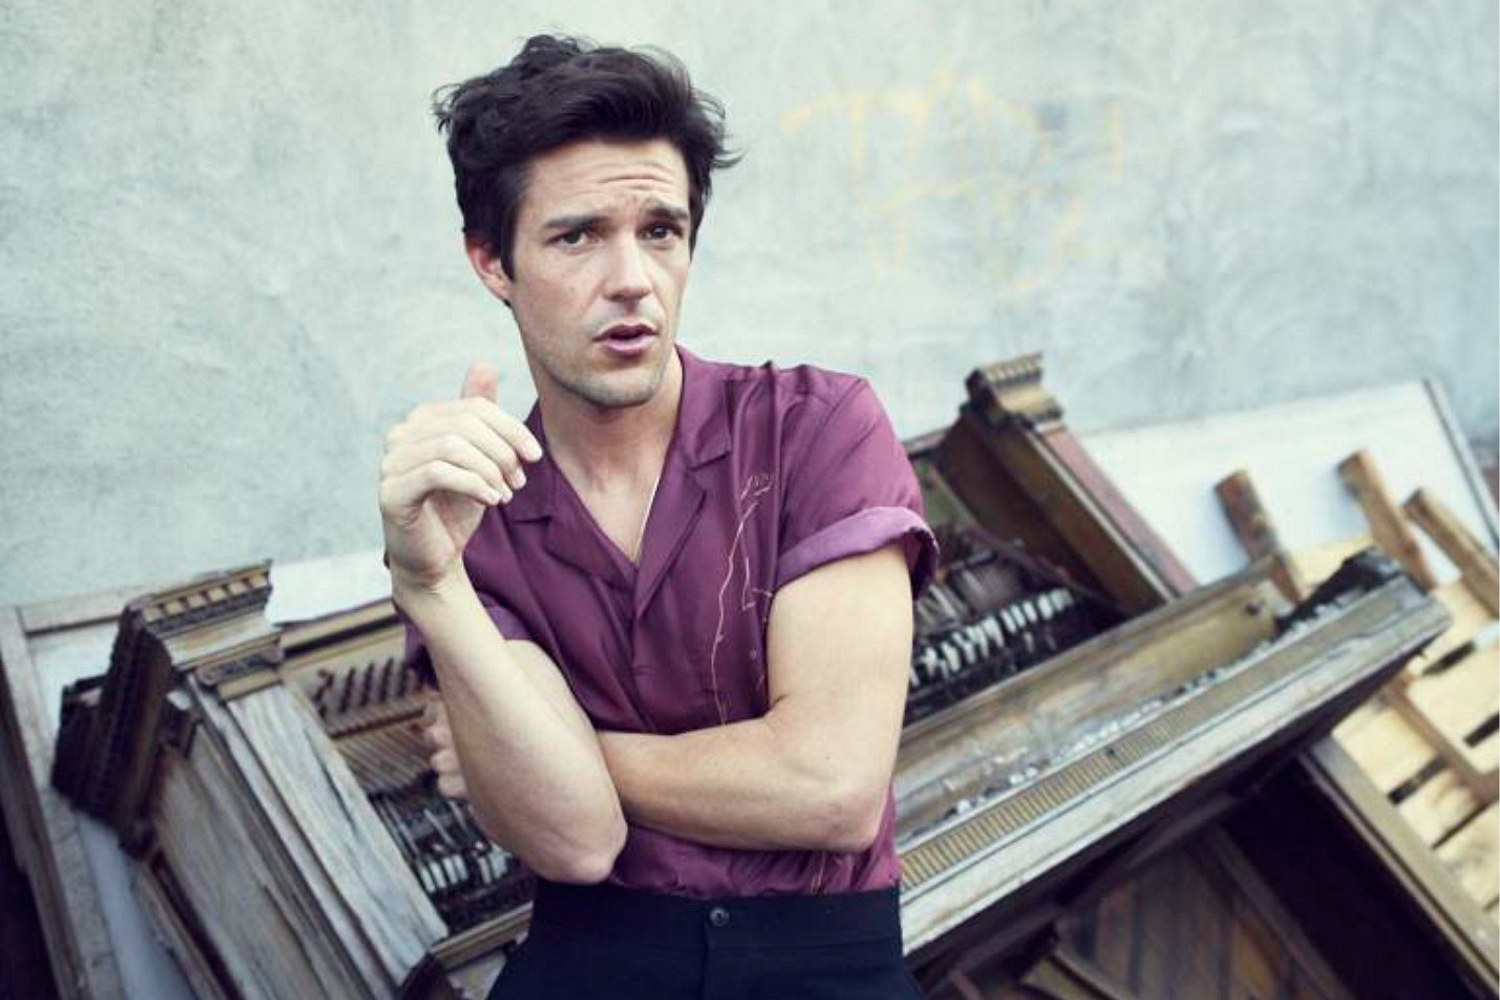 Brandon Flowers confirms new UK dates ahead of new single launch